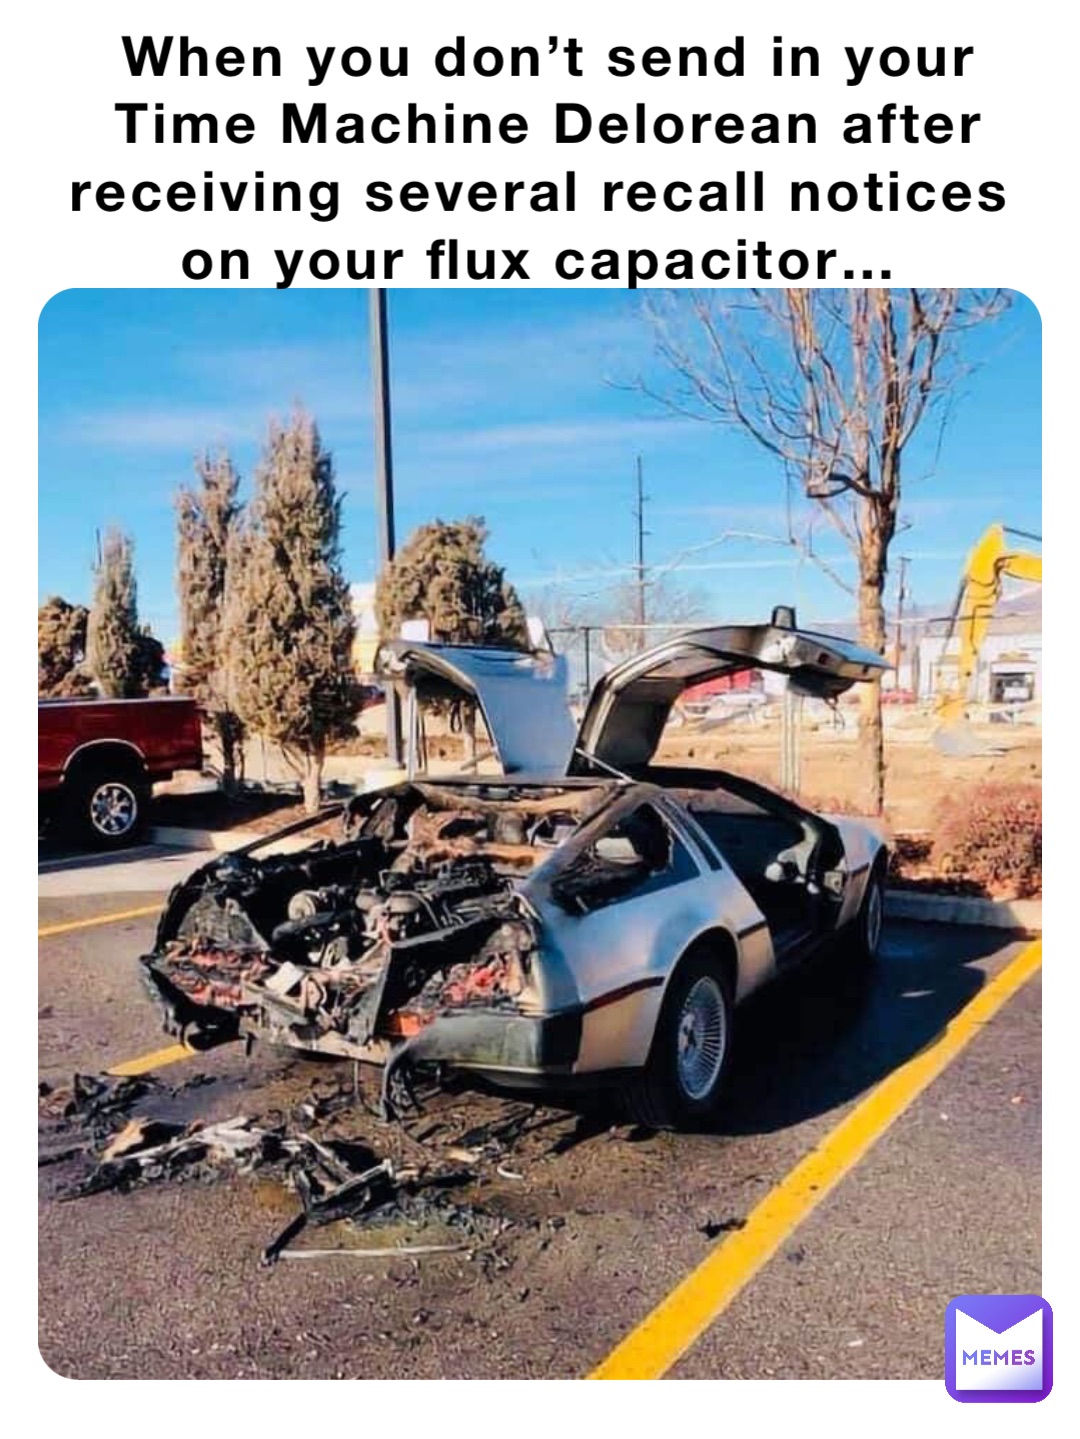 When you don’t send in your Time Machine Delorean after receiving several recall notices on your flux capacitor…